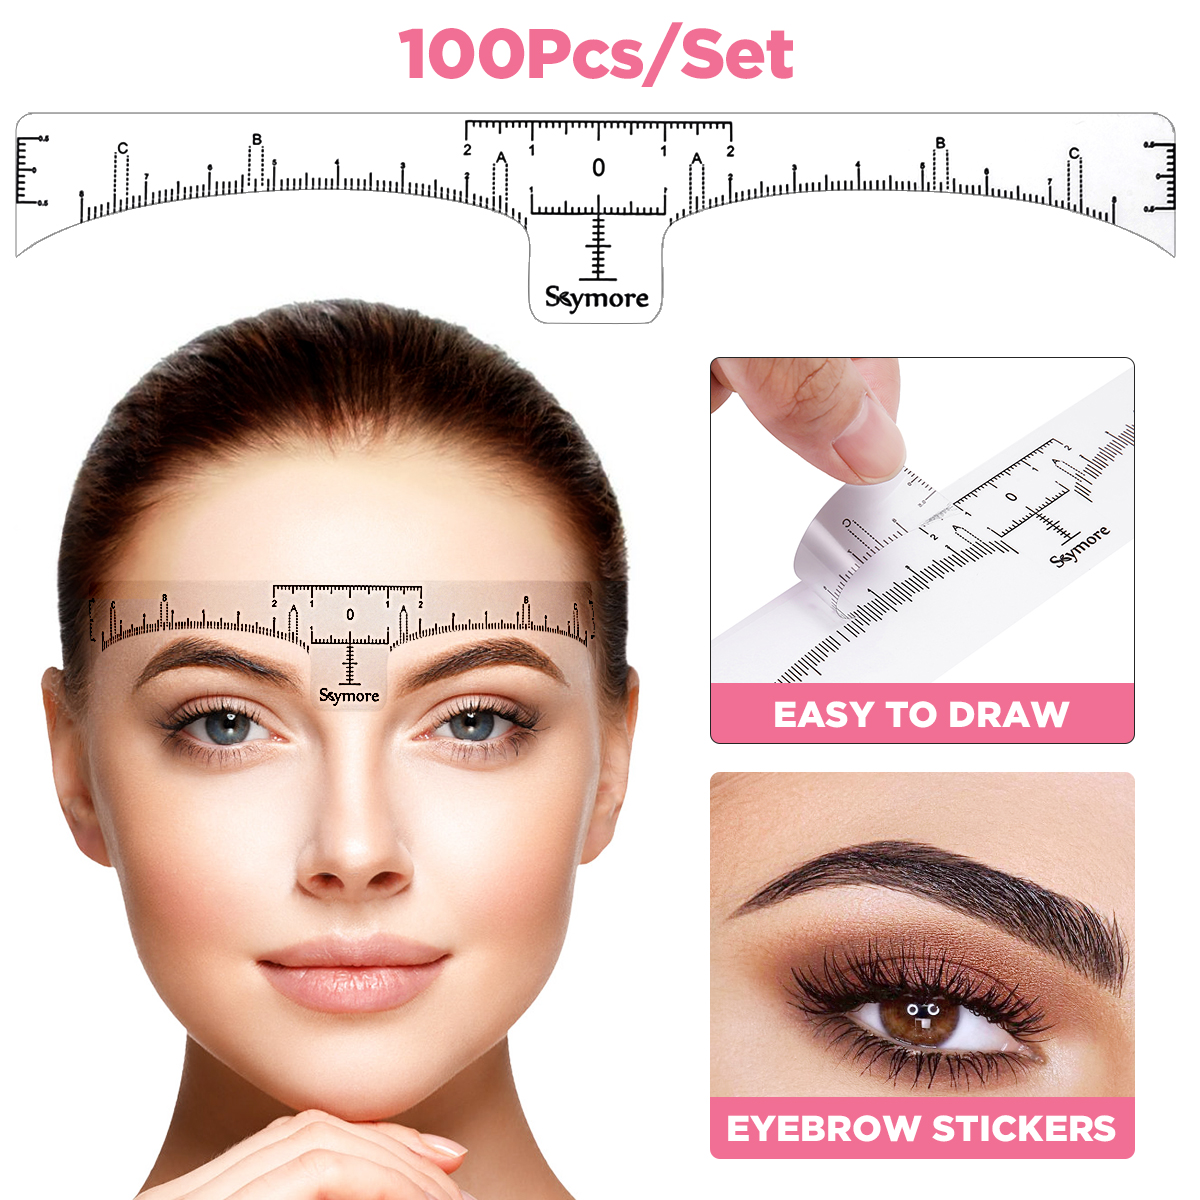 100PCS-Eyebrow-Stencil-One-time-Eyebrow-Grooming-Stencil-Measure-Ruler-Brow-Shaper-Makeup-Shaping-To-1940017-6